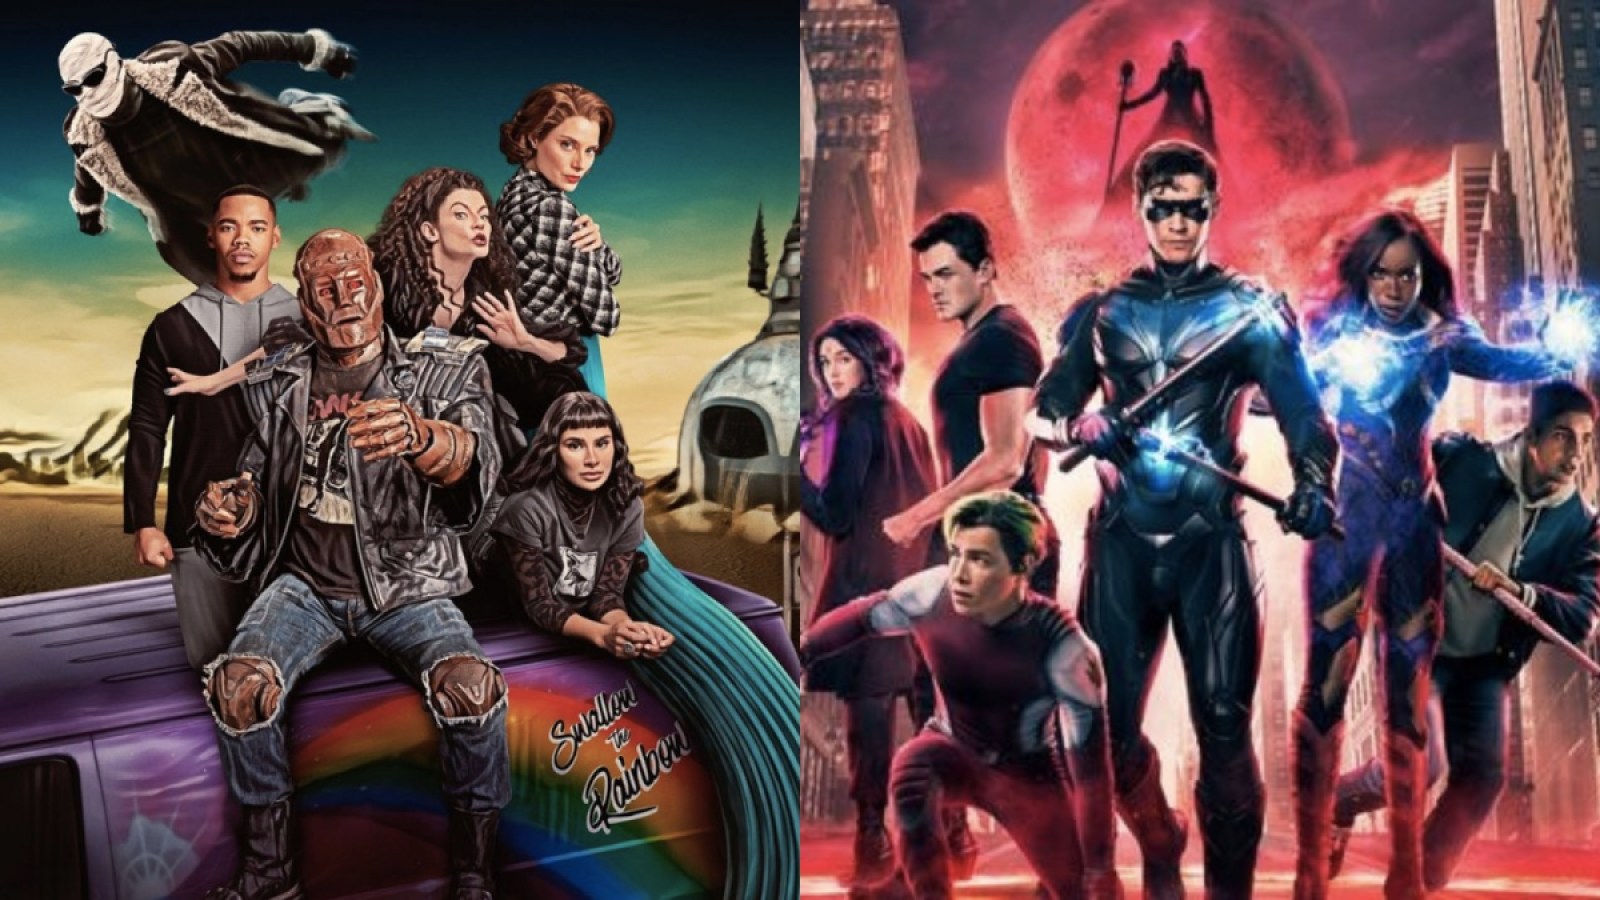 Promotional images from Doom Patrol and Titans